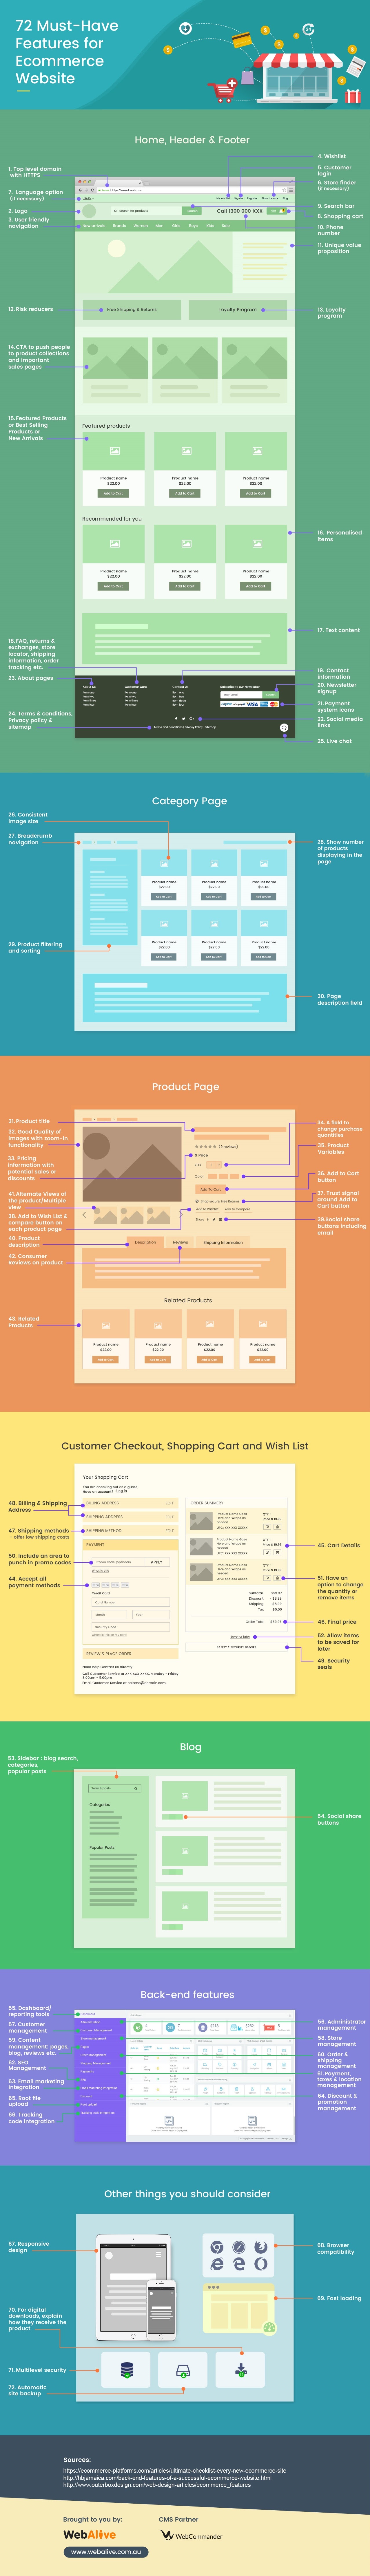 72 Essential Features of an Ecommerce Website - #infographic